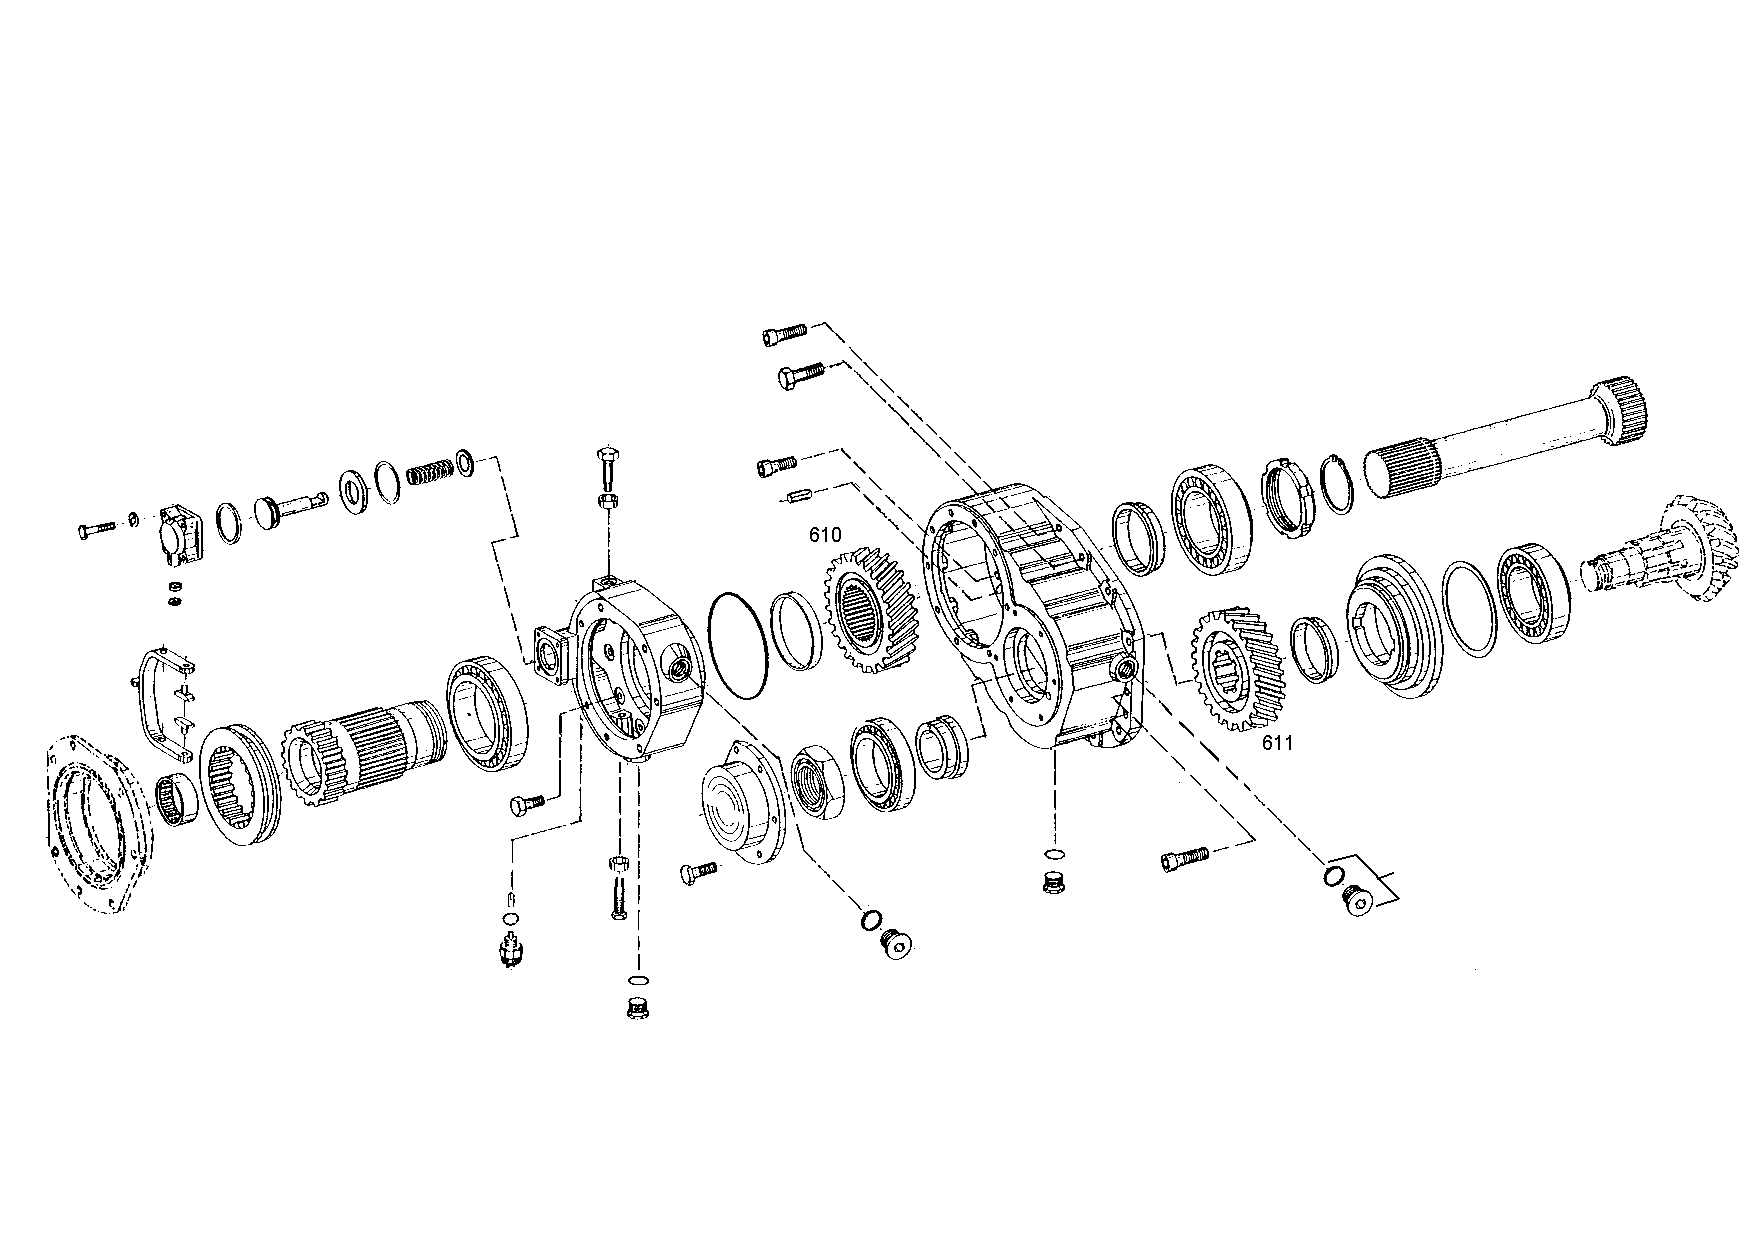 drawing for MOXY TRUCKS AS 352029 - FILTER INSERT (figure 4)